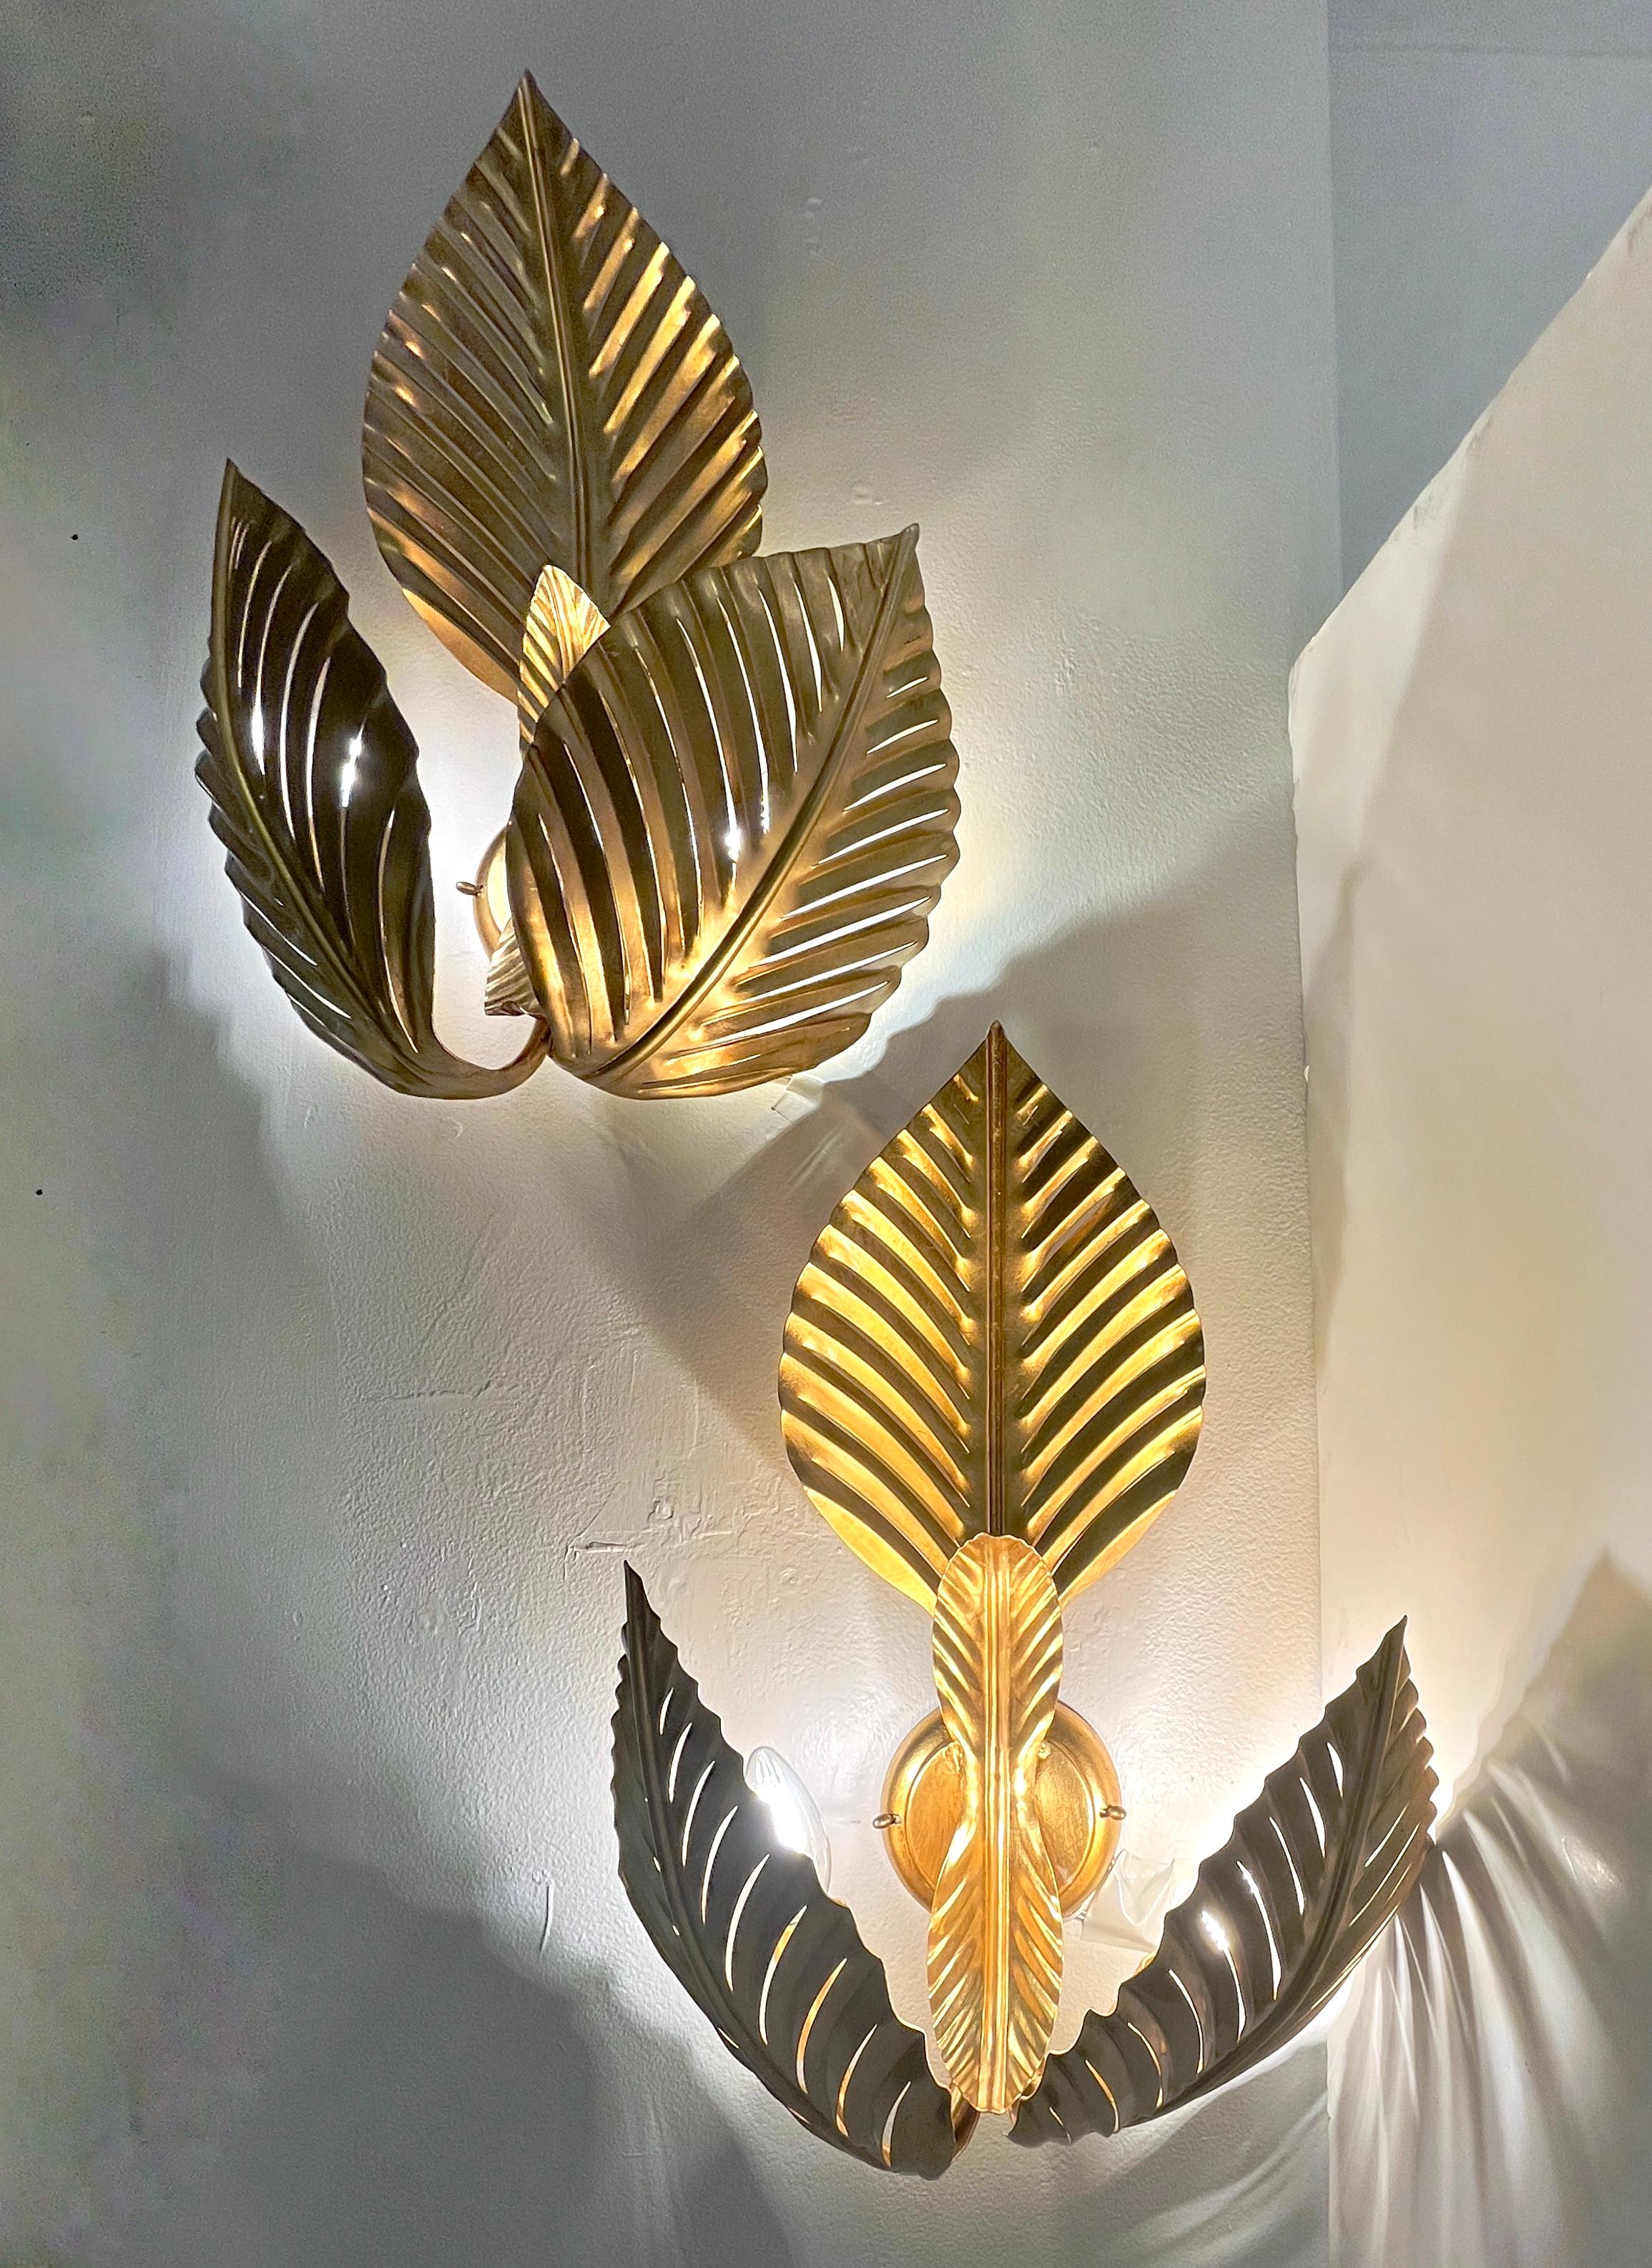 Entirely hand made in Italy, these bespoke wall lights with Hollywood Regency glamour, are composed of 3 Art Deco Design leaves made of hand-gilt iron, supported by a central round back plate. Each leaf is decorated with perforated slits, not only